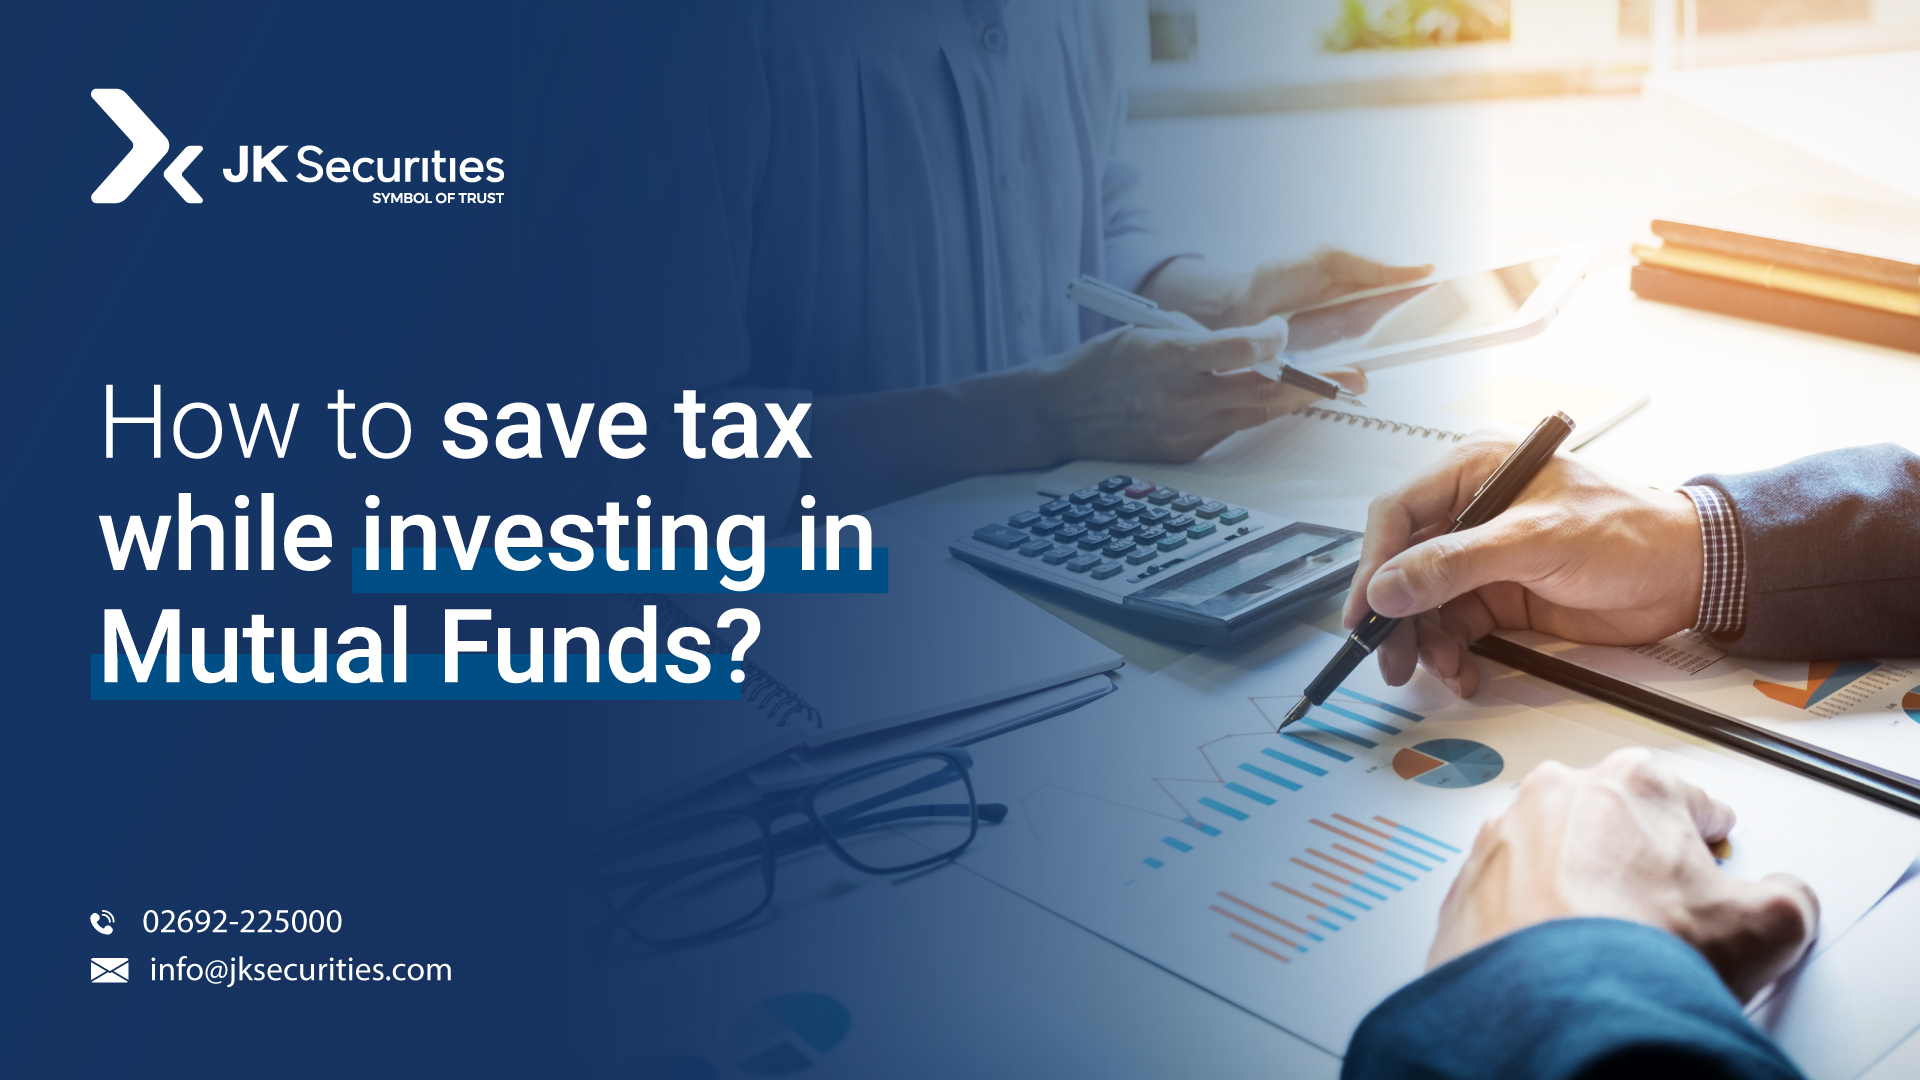 How to save tax while investing in Mutual Funds?